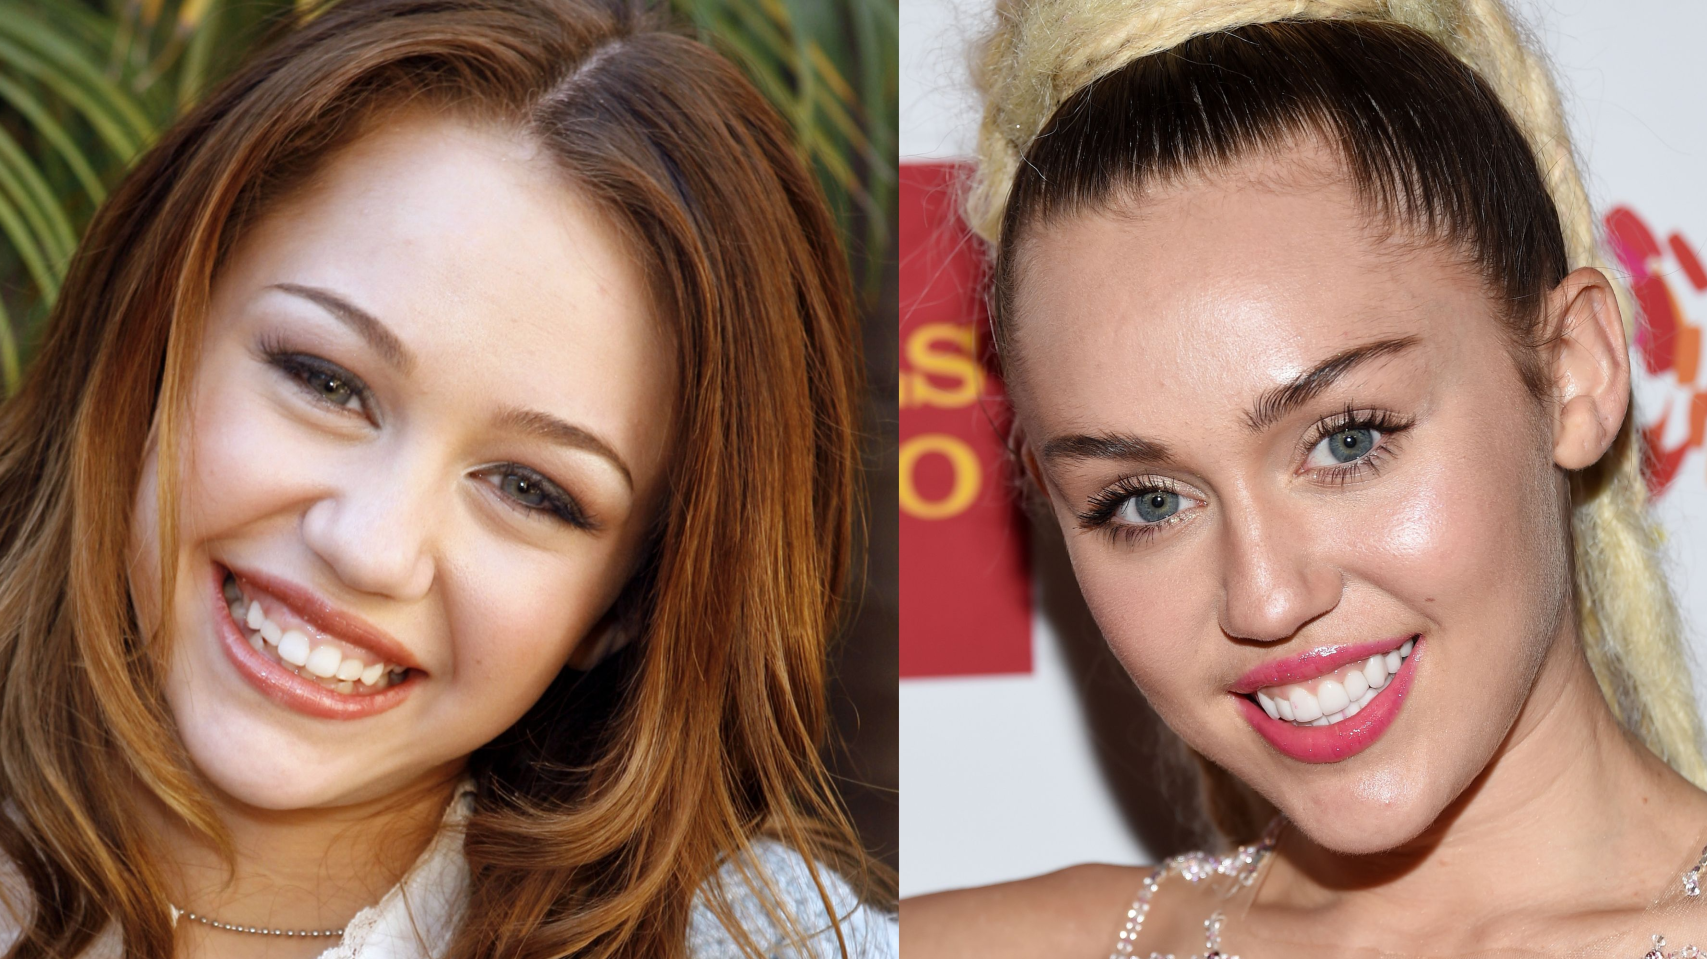 Celebs with overbite